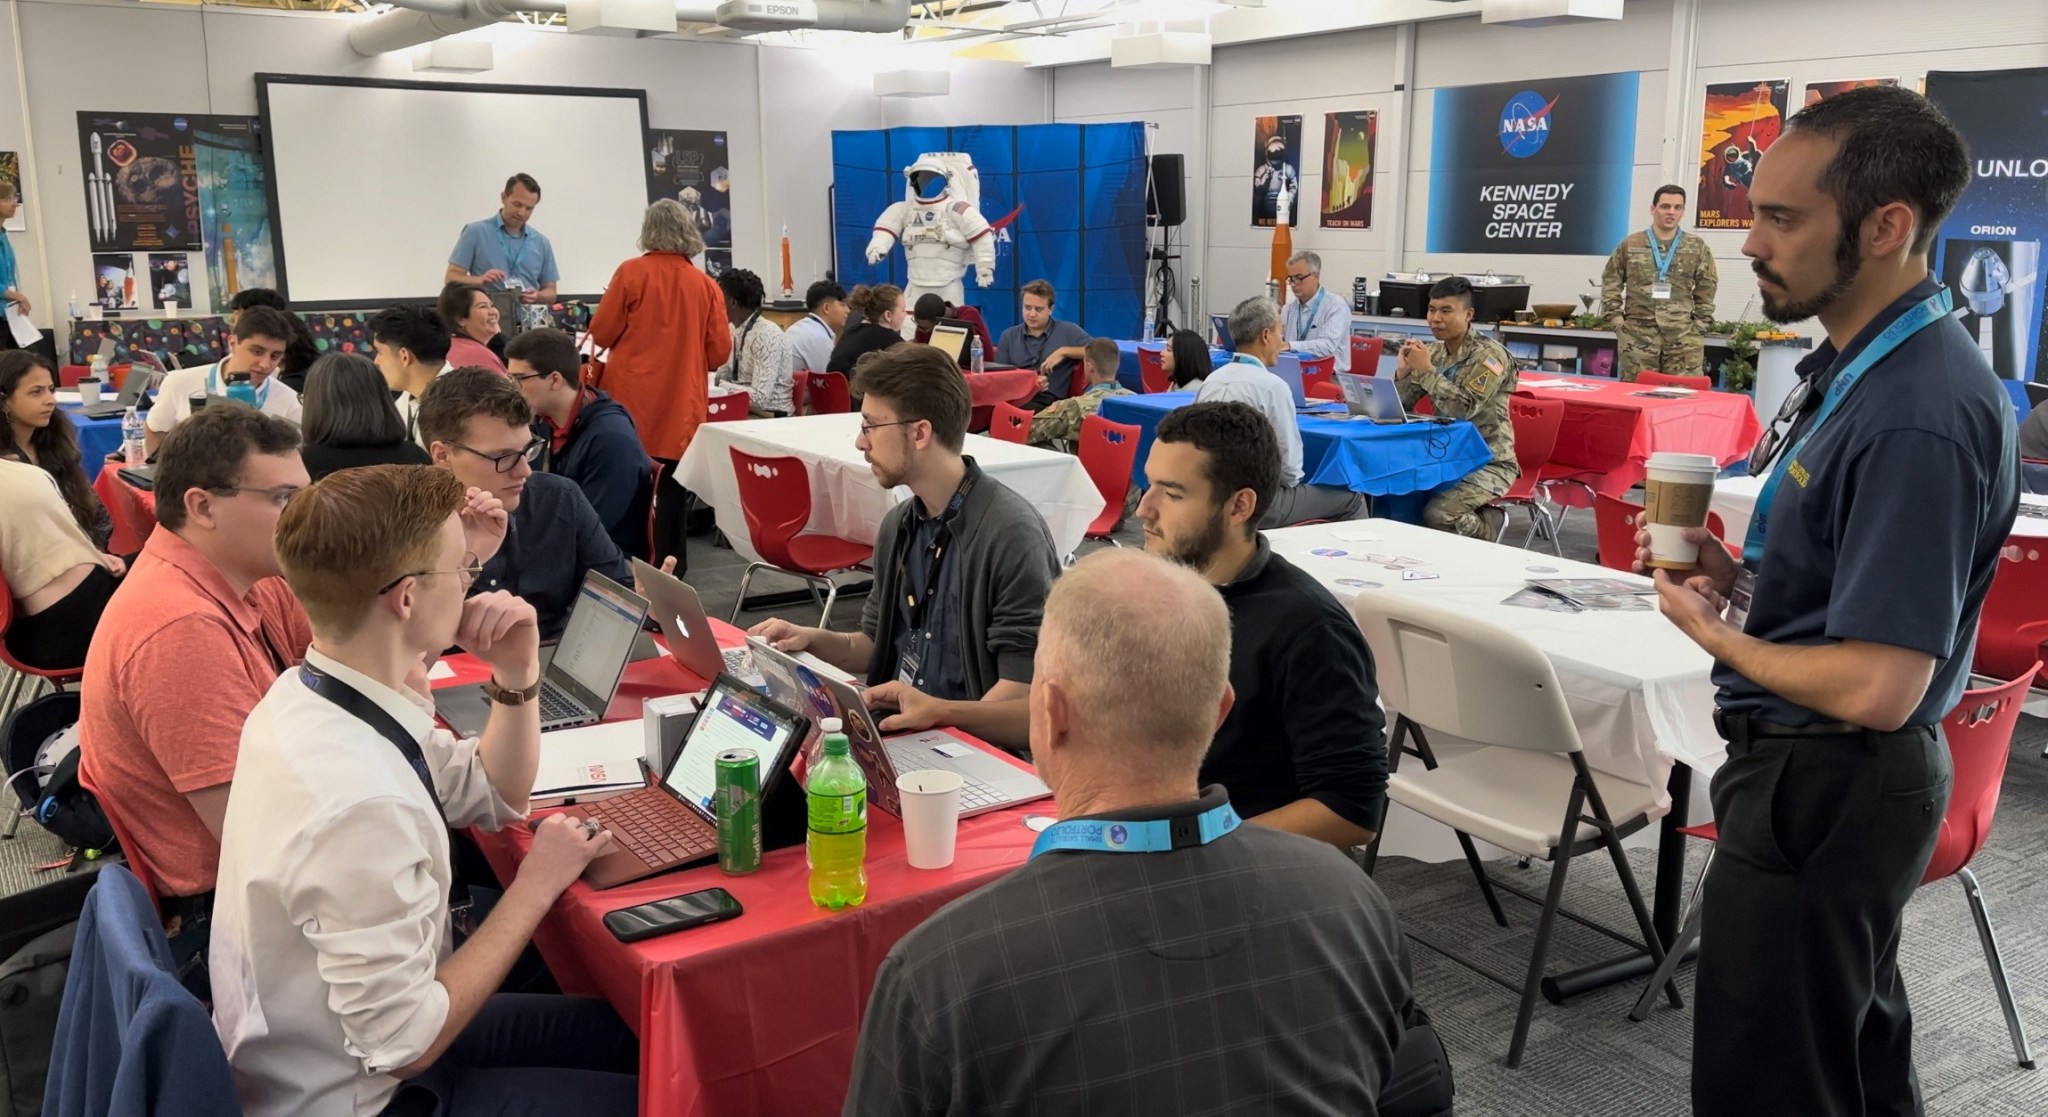 a group of university students sit at tables in a conference room. Some have laptops and a few are holding small CubeSats. Along the wall are NASA display items including a space suit and a mural of the NASA logo.